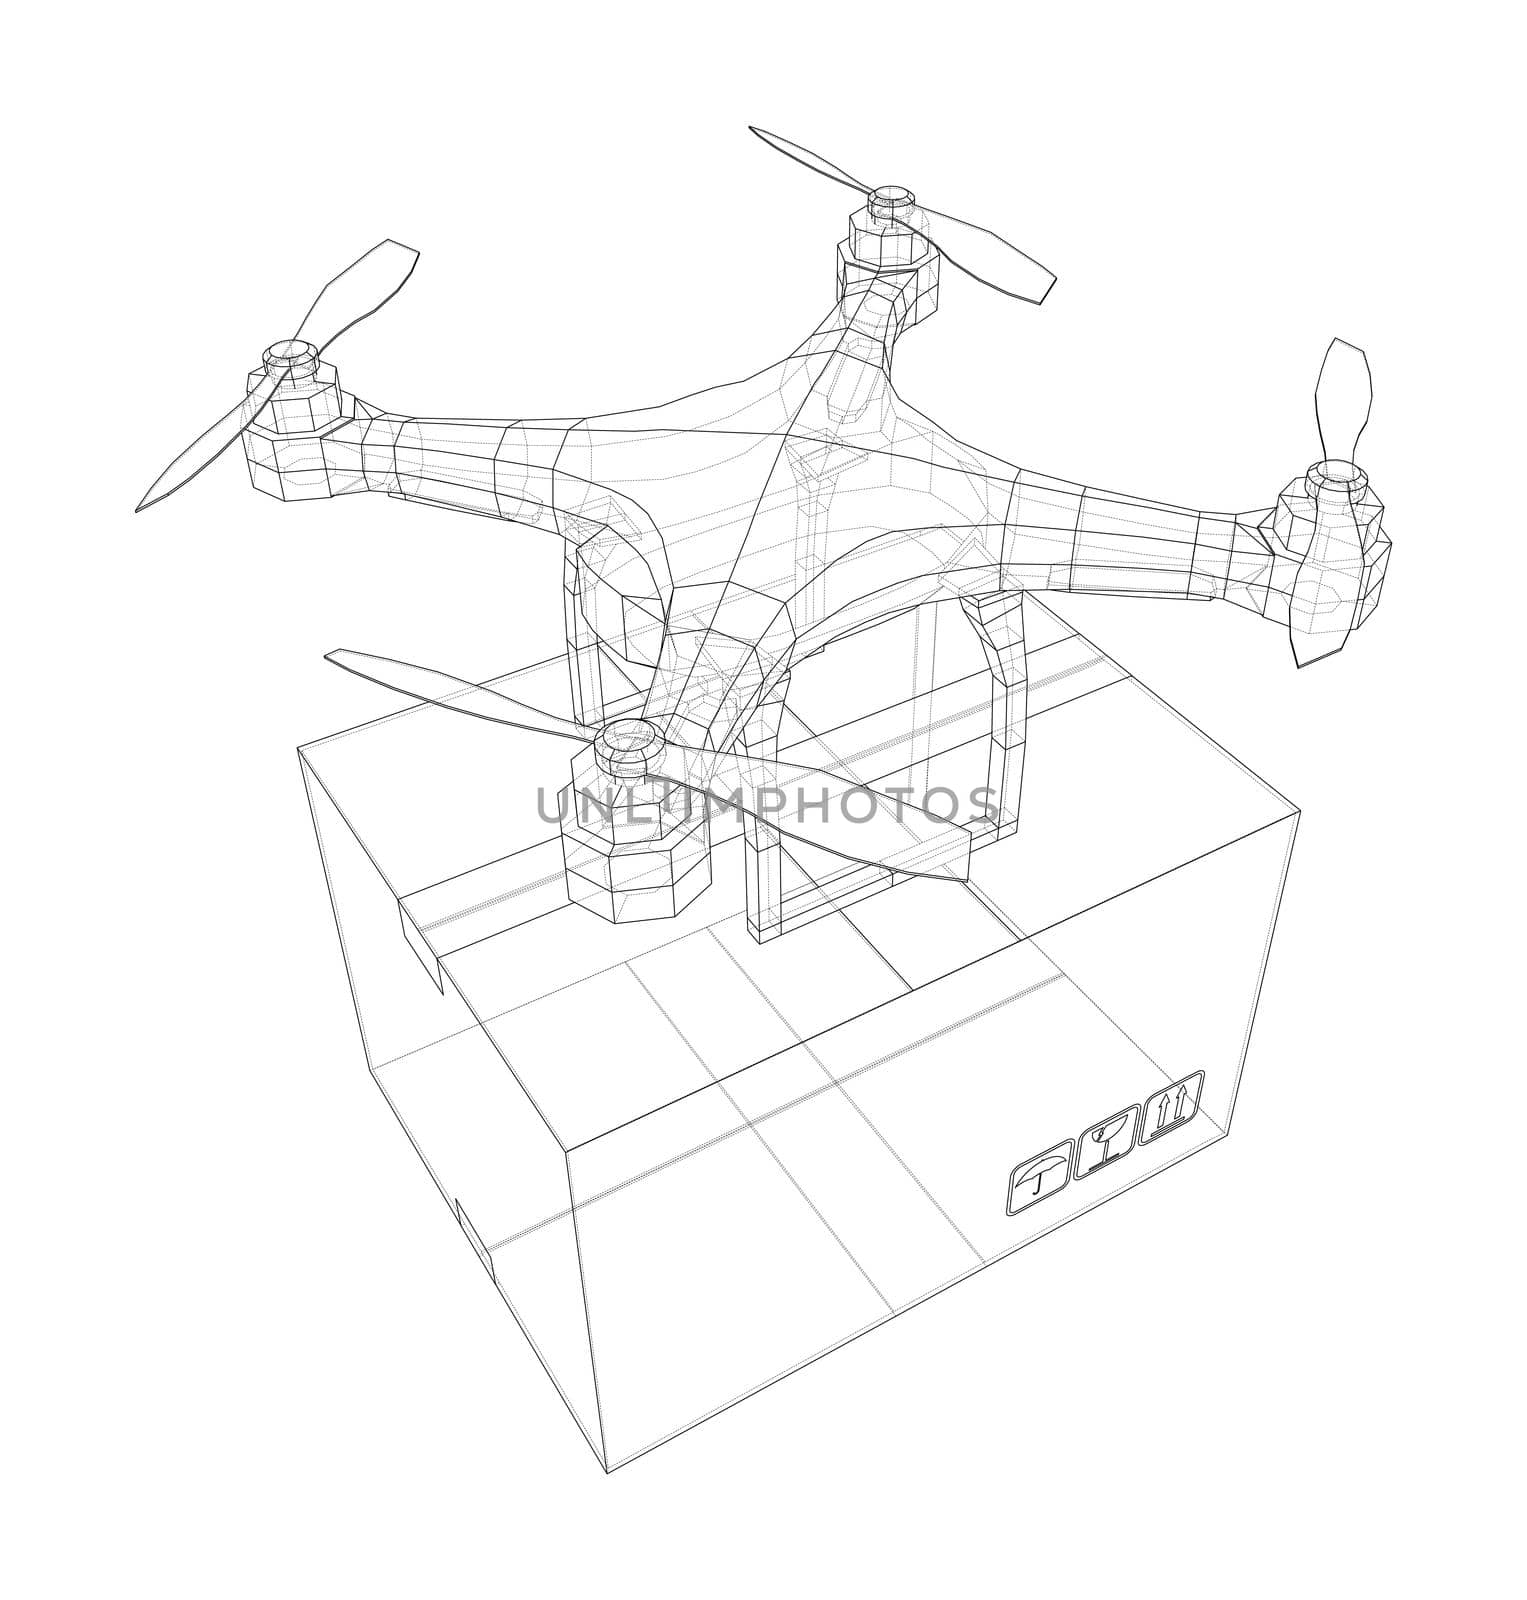 Delivery drone concept outline by cherezoff